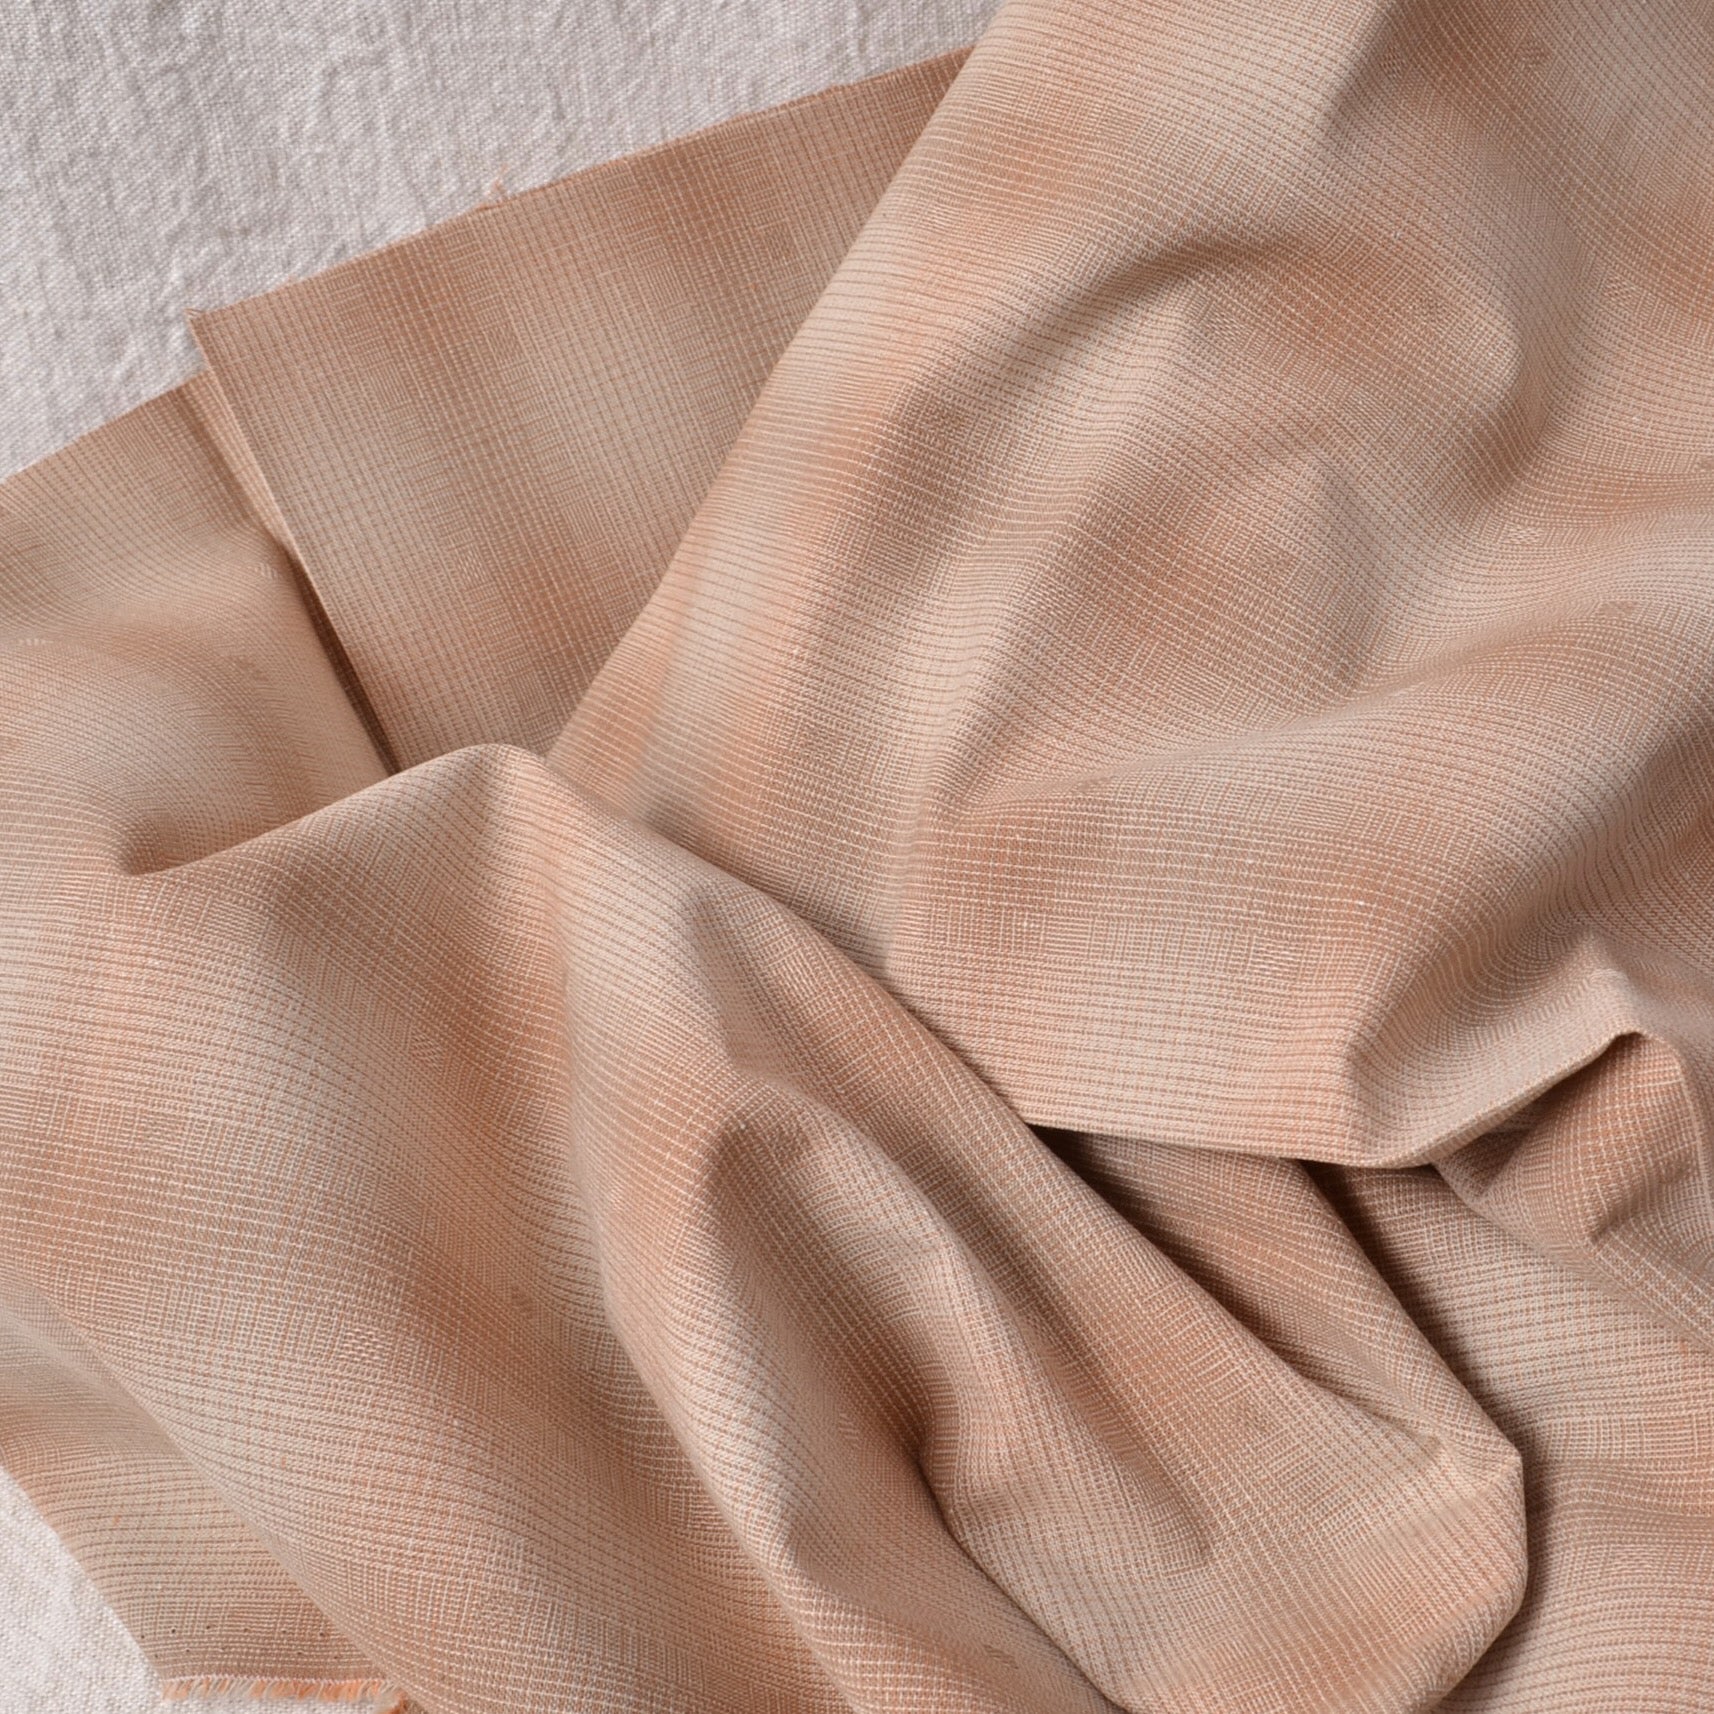 Dyed Yarn Cotton Fabric for Sewing & Quilting, Blush Brown